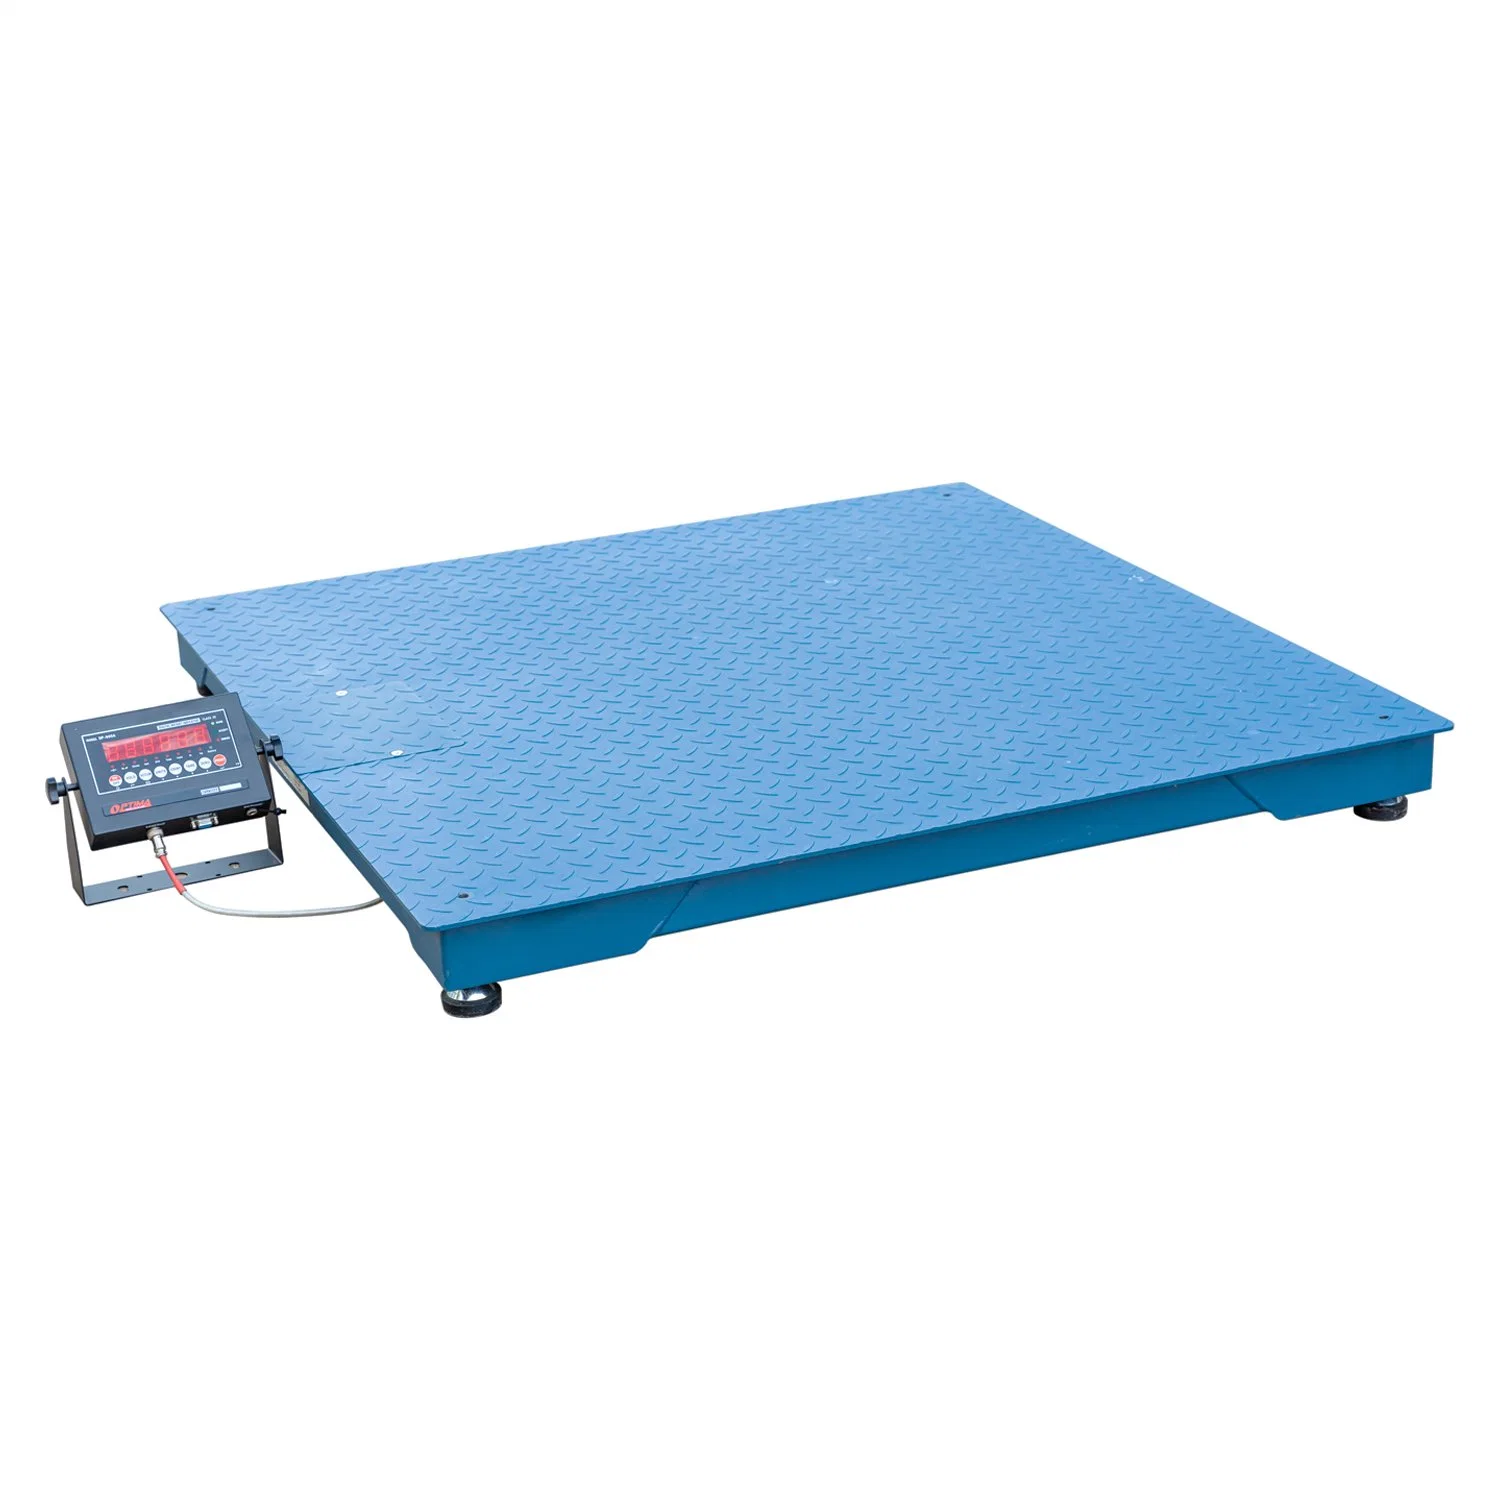 High-Precision Industrial Floor Platform Bench Scale with Ntep Certification